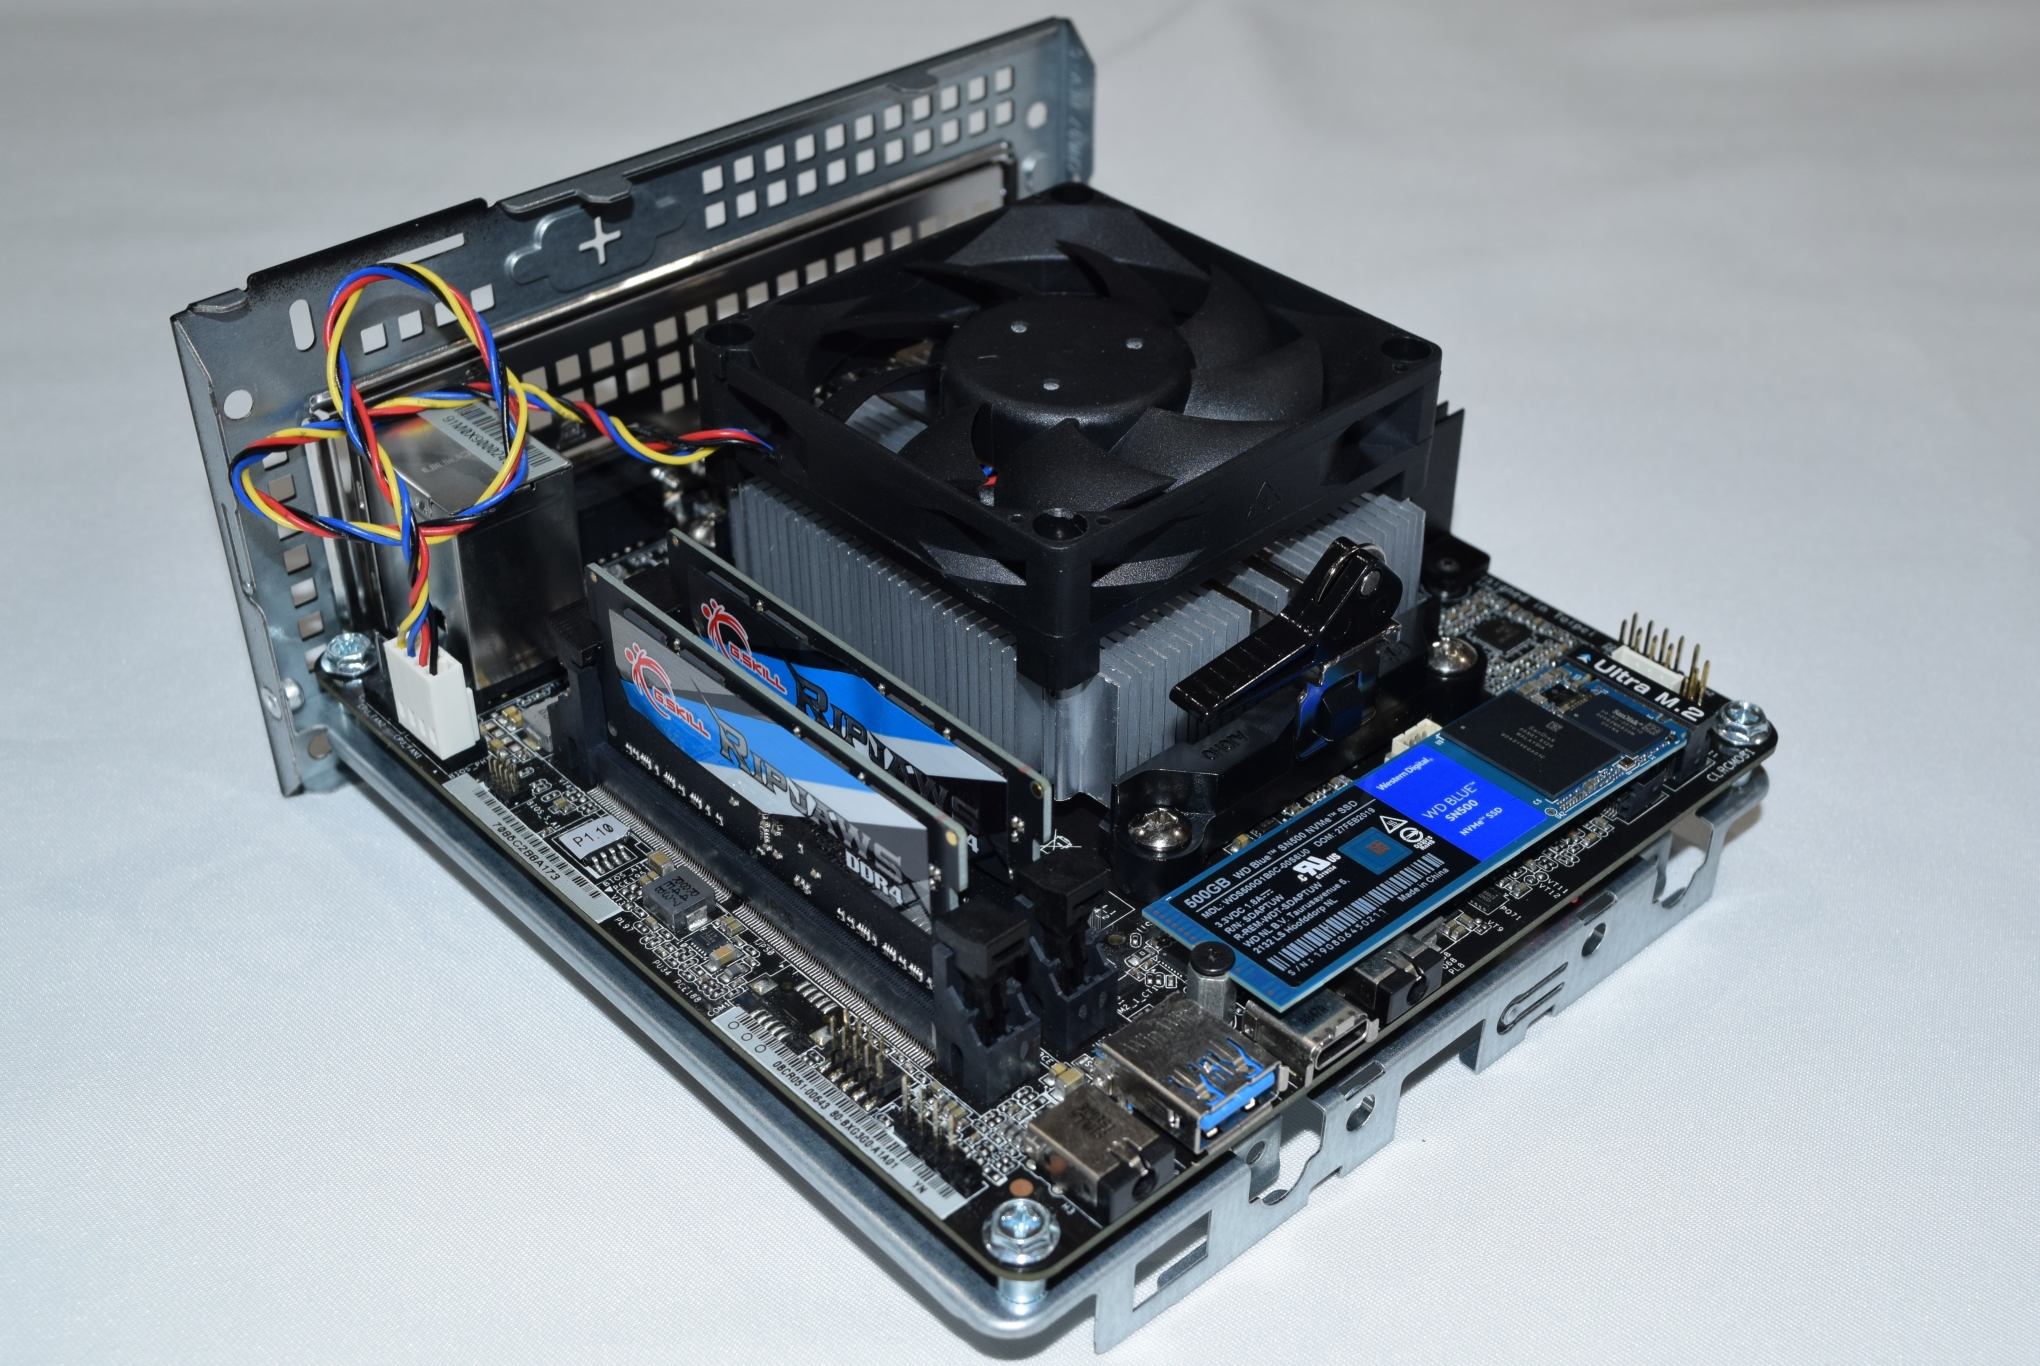 Closing Thoughts - The ASRock DeskMini A300 Review: An Affordable 